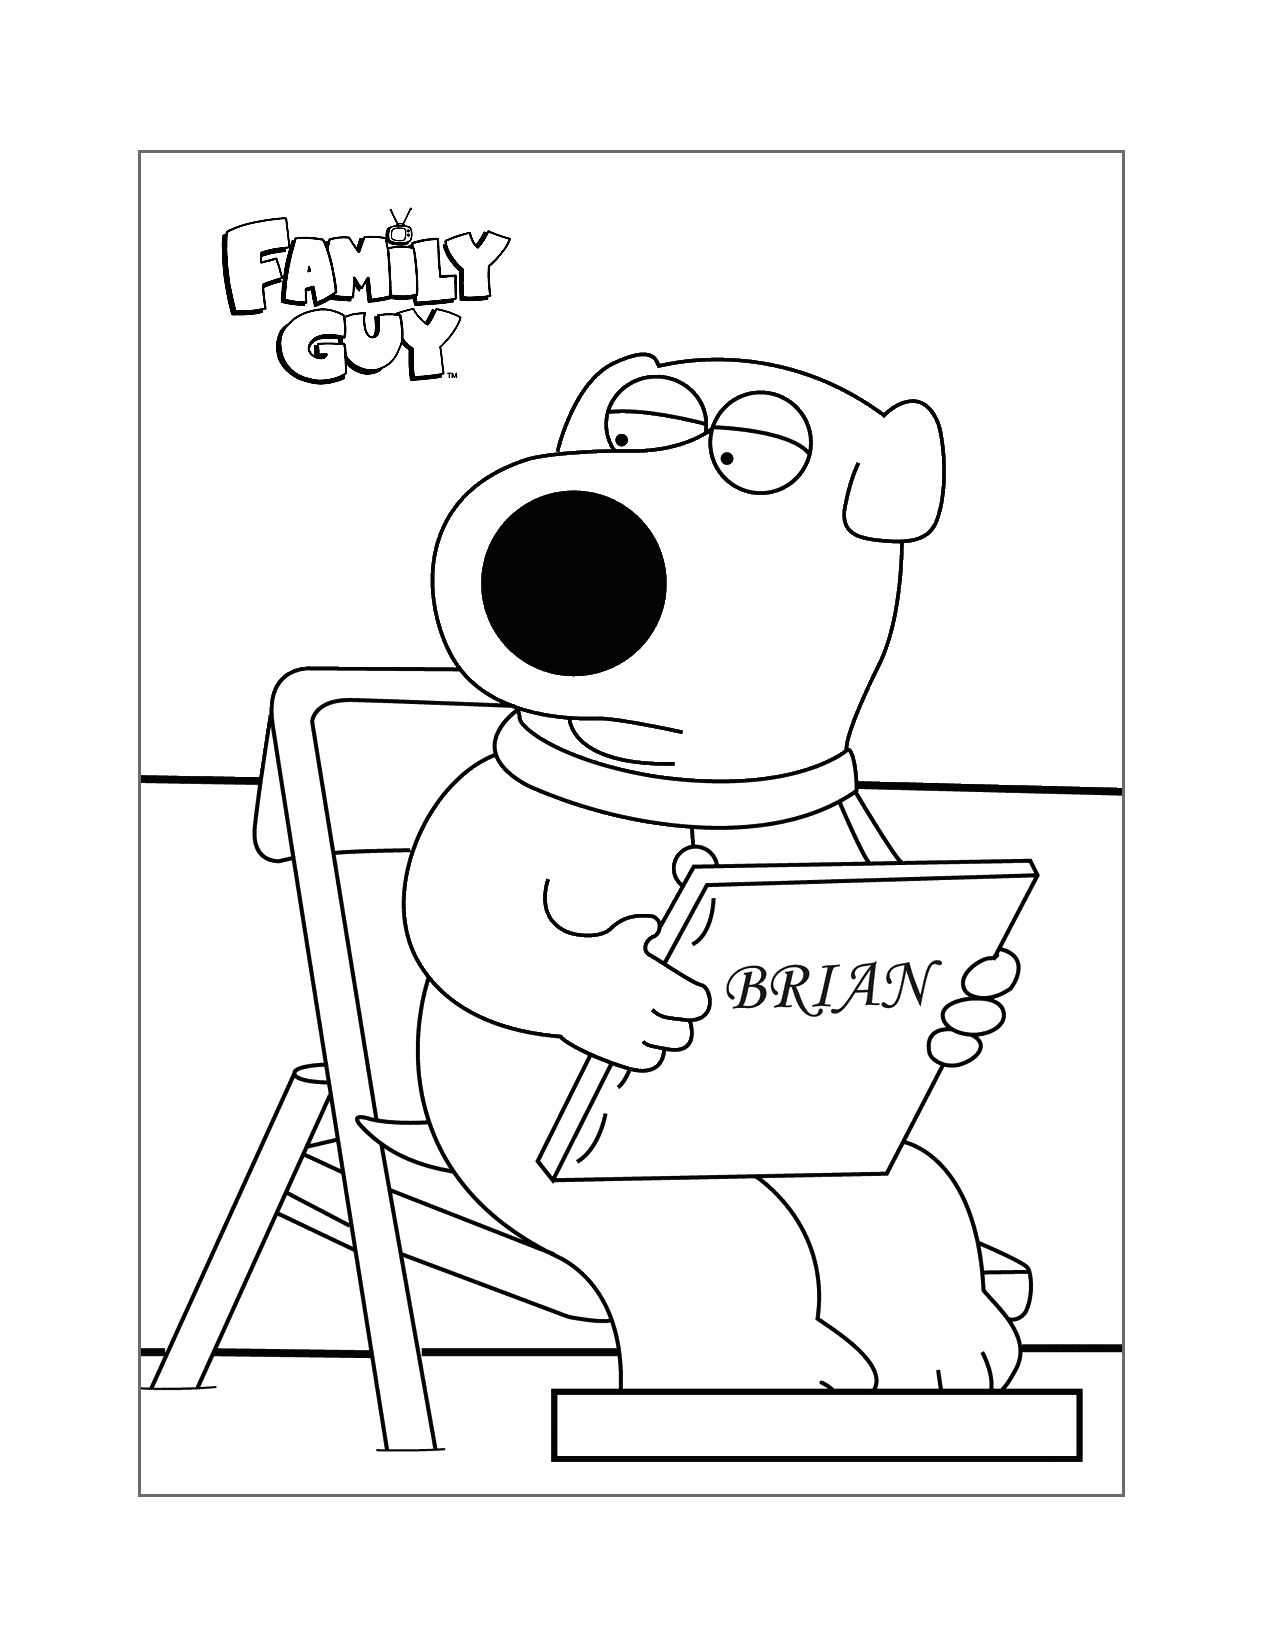 Brian Family Guy Coloring Page